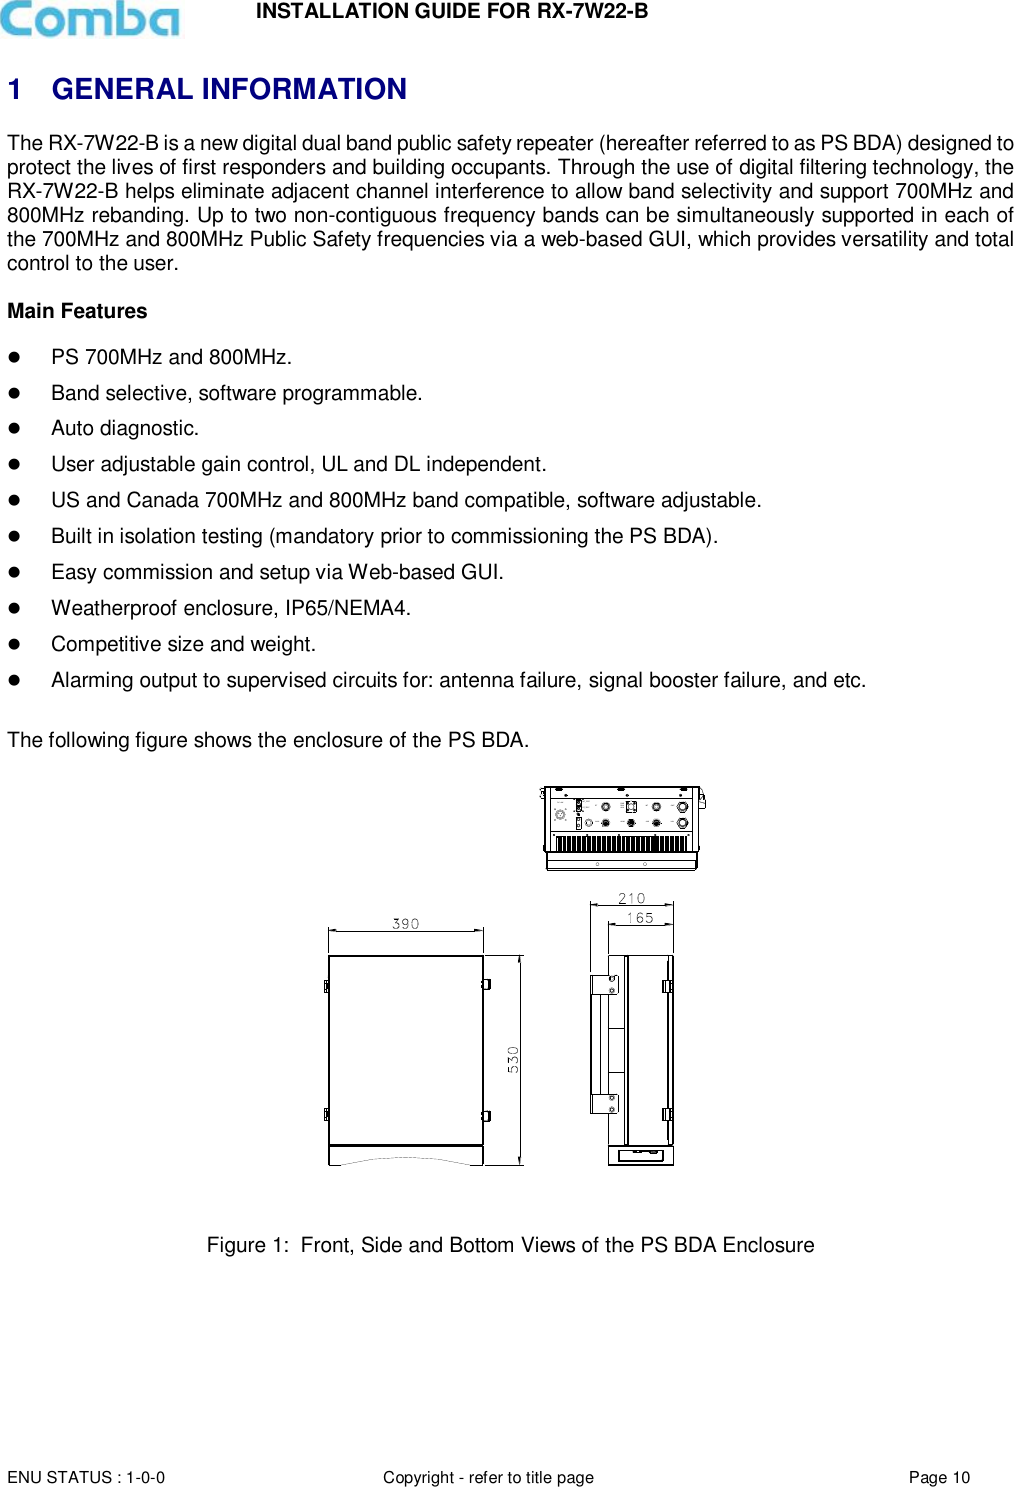 INSTALLATION GUIDE FOR RX-7W22-B  ENU STATUS : 1-0-0 Copyright - refer to title page Page 10     1  GENERAL INFORMATION The RX-7W22-B is a new digital dual band public safety repeater (hereafter referred to as PS BDA) designed to protect the lives of first responders and building occupants. Through the use of digital filtering technology, the RX-7W22-B helps eliminate adjacent channel interference to allow band selectivity and support 700MHz and 800MHz rebanding. Up to two non-contiguous frequency bands can be simultaneously supported in each of the 700MHz and 800MHz Public Safety frequencies via a web-based GUI, which provides versatility and total control to the user.  Main Features   PS 700MHz and 800MHz.  Band selective, software programmable.  Auto diagnostic.  User adjustable gain control, UL and DL independent.  US and Canada 700MHz and 800MHz band compatible, software adjustable.  Built in isolation testing (mandatory prior to commissioning the PS BDA).  Easy commission and setup via Web-based GUI.  Weatherproof enclosure, IP65/NEMA4.  Competitive size and weight.  Alarming output to supervised circuits for: antenna failure, signal booster failure, and etc.  The following figure shows the enclosure of the PS BDA.  DT MTDC -48VAUXPWRALMRUNALM1MT_TESTDT_TESTLANOMTALM2  Figure 1:  Front, Side and Bottom Views of the PS BDA Enclosure   